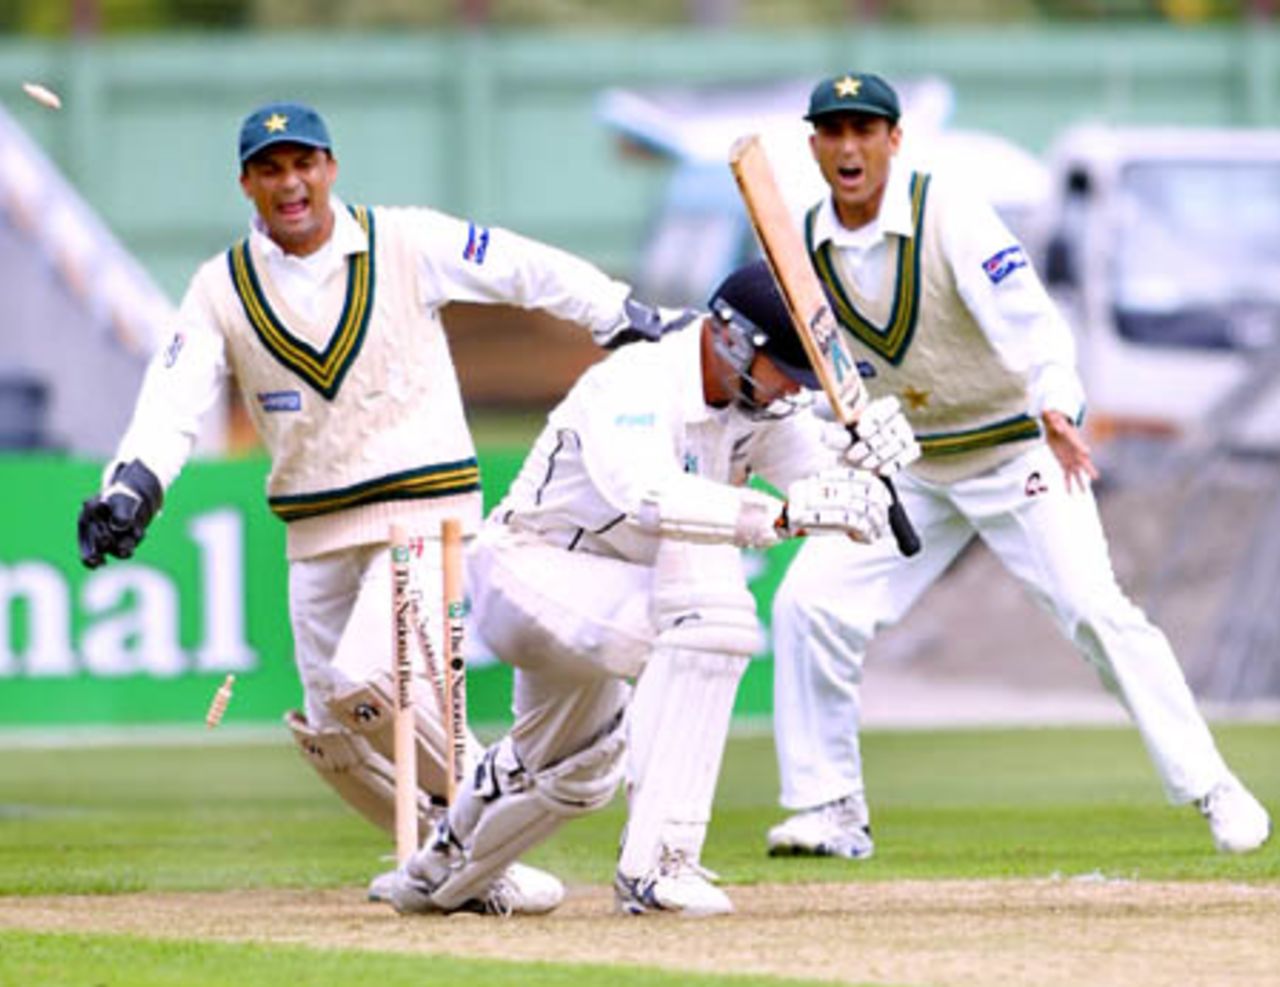 New Zealand opening batsman Mark Richardson leaves a ball from Pakistan off spinner Saqlain Mushtaq, only to be bowled for 46 in his first innings. Wicket-keeper Moin Khan and slip fielder Younis Khan look on in celebration. 2nd Test: New Zealand v Pakistan at Jade Stadium, Christchurch, 15-19 March 2001 (15 March 2001).